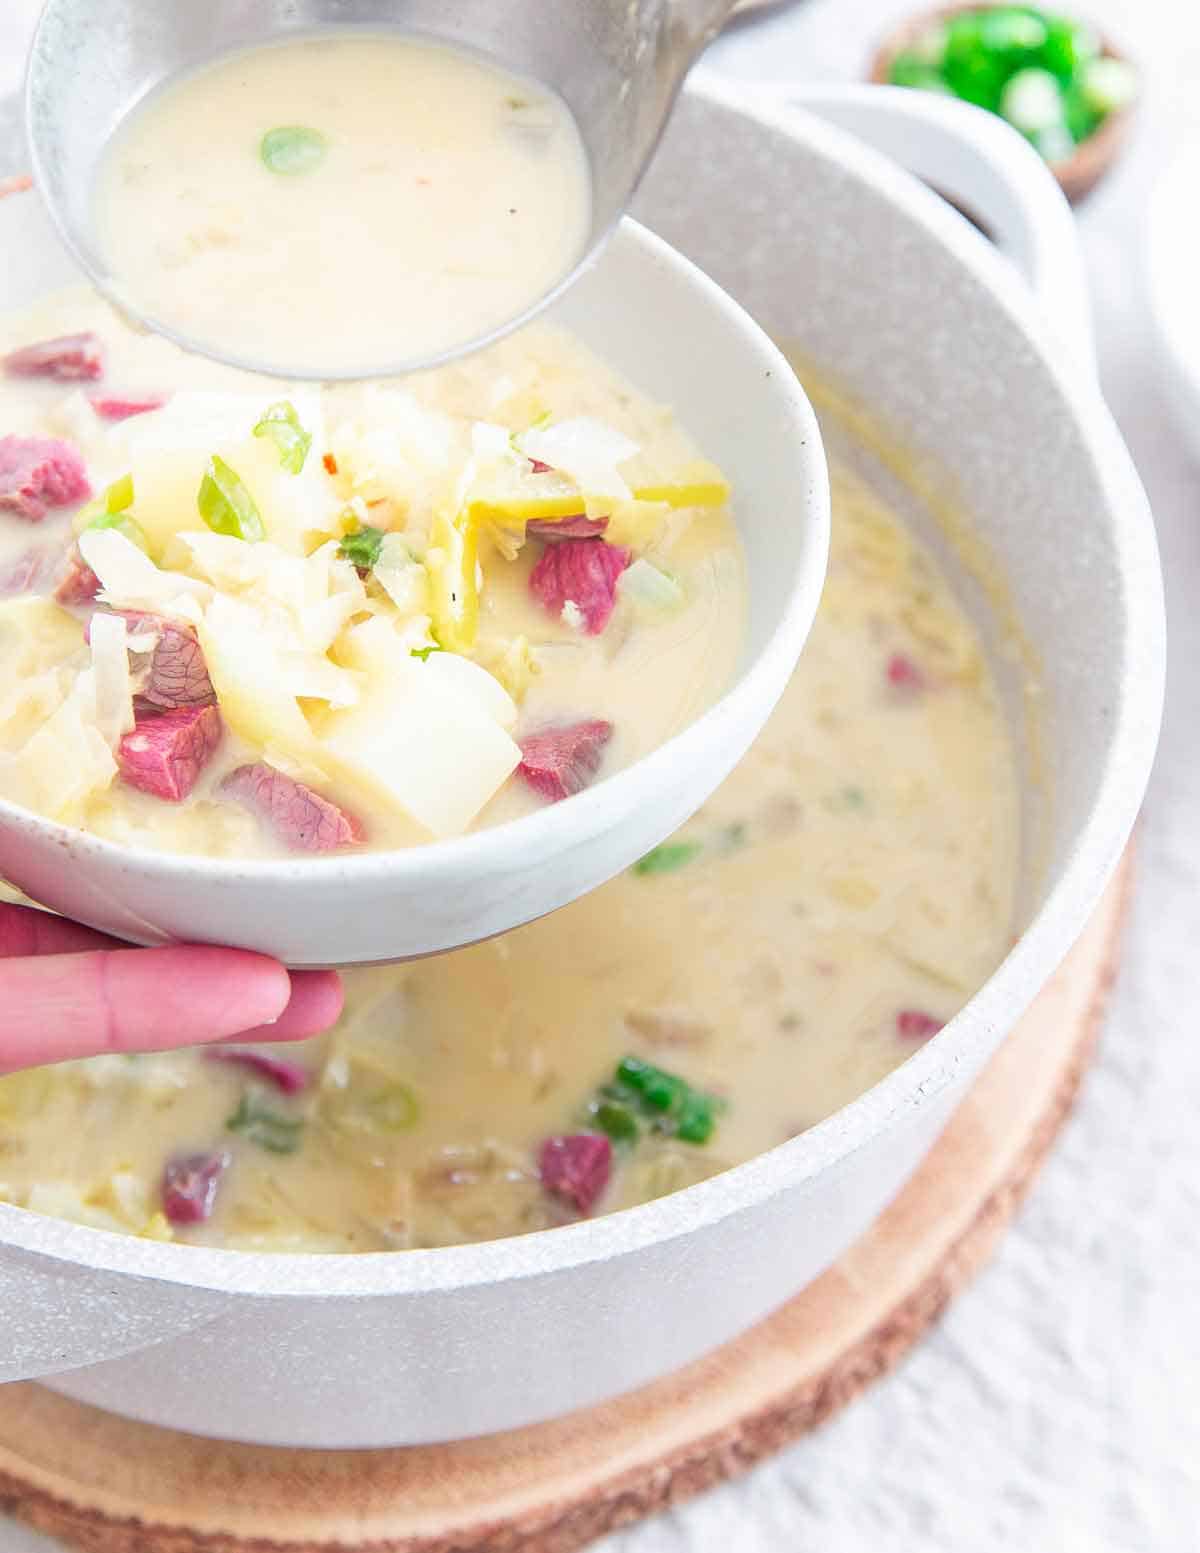 This Reuben soup is a hearty, creamy and comforting easy recipe that tastes just like the classic sandwich.